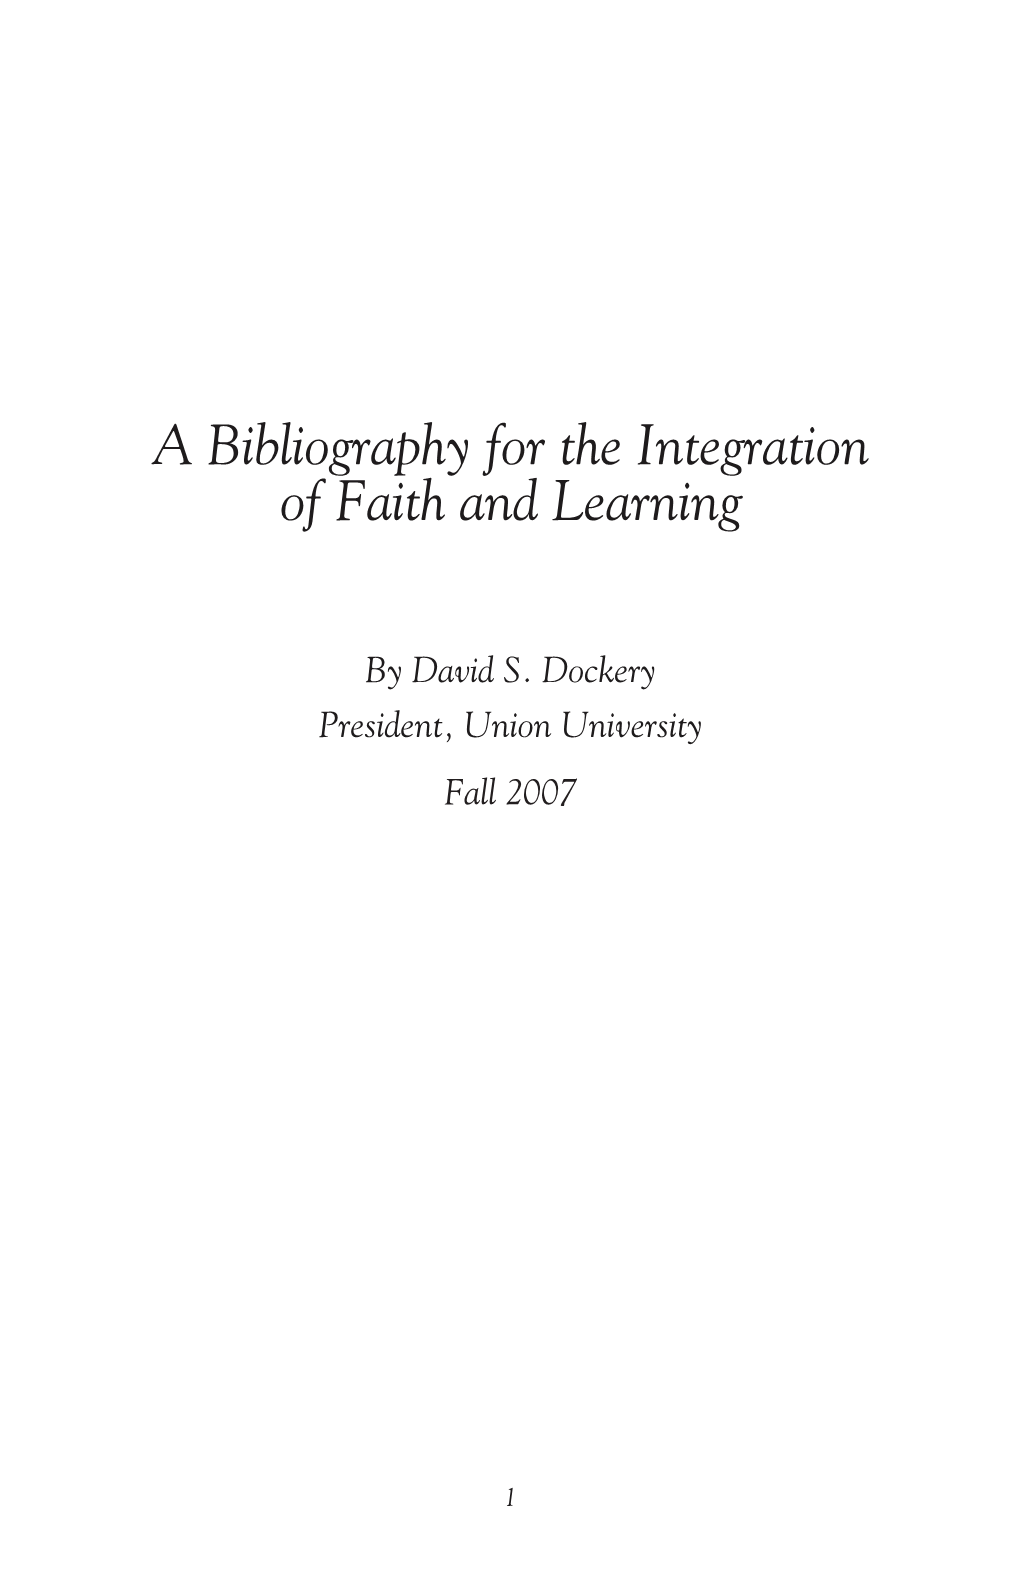 A Bibliography for the Integration of Faith and Learning